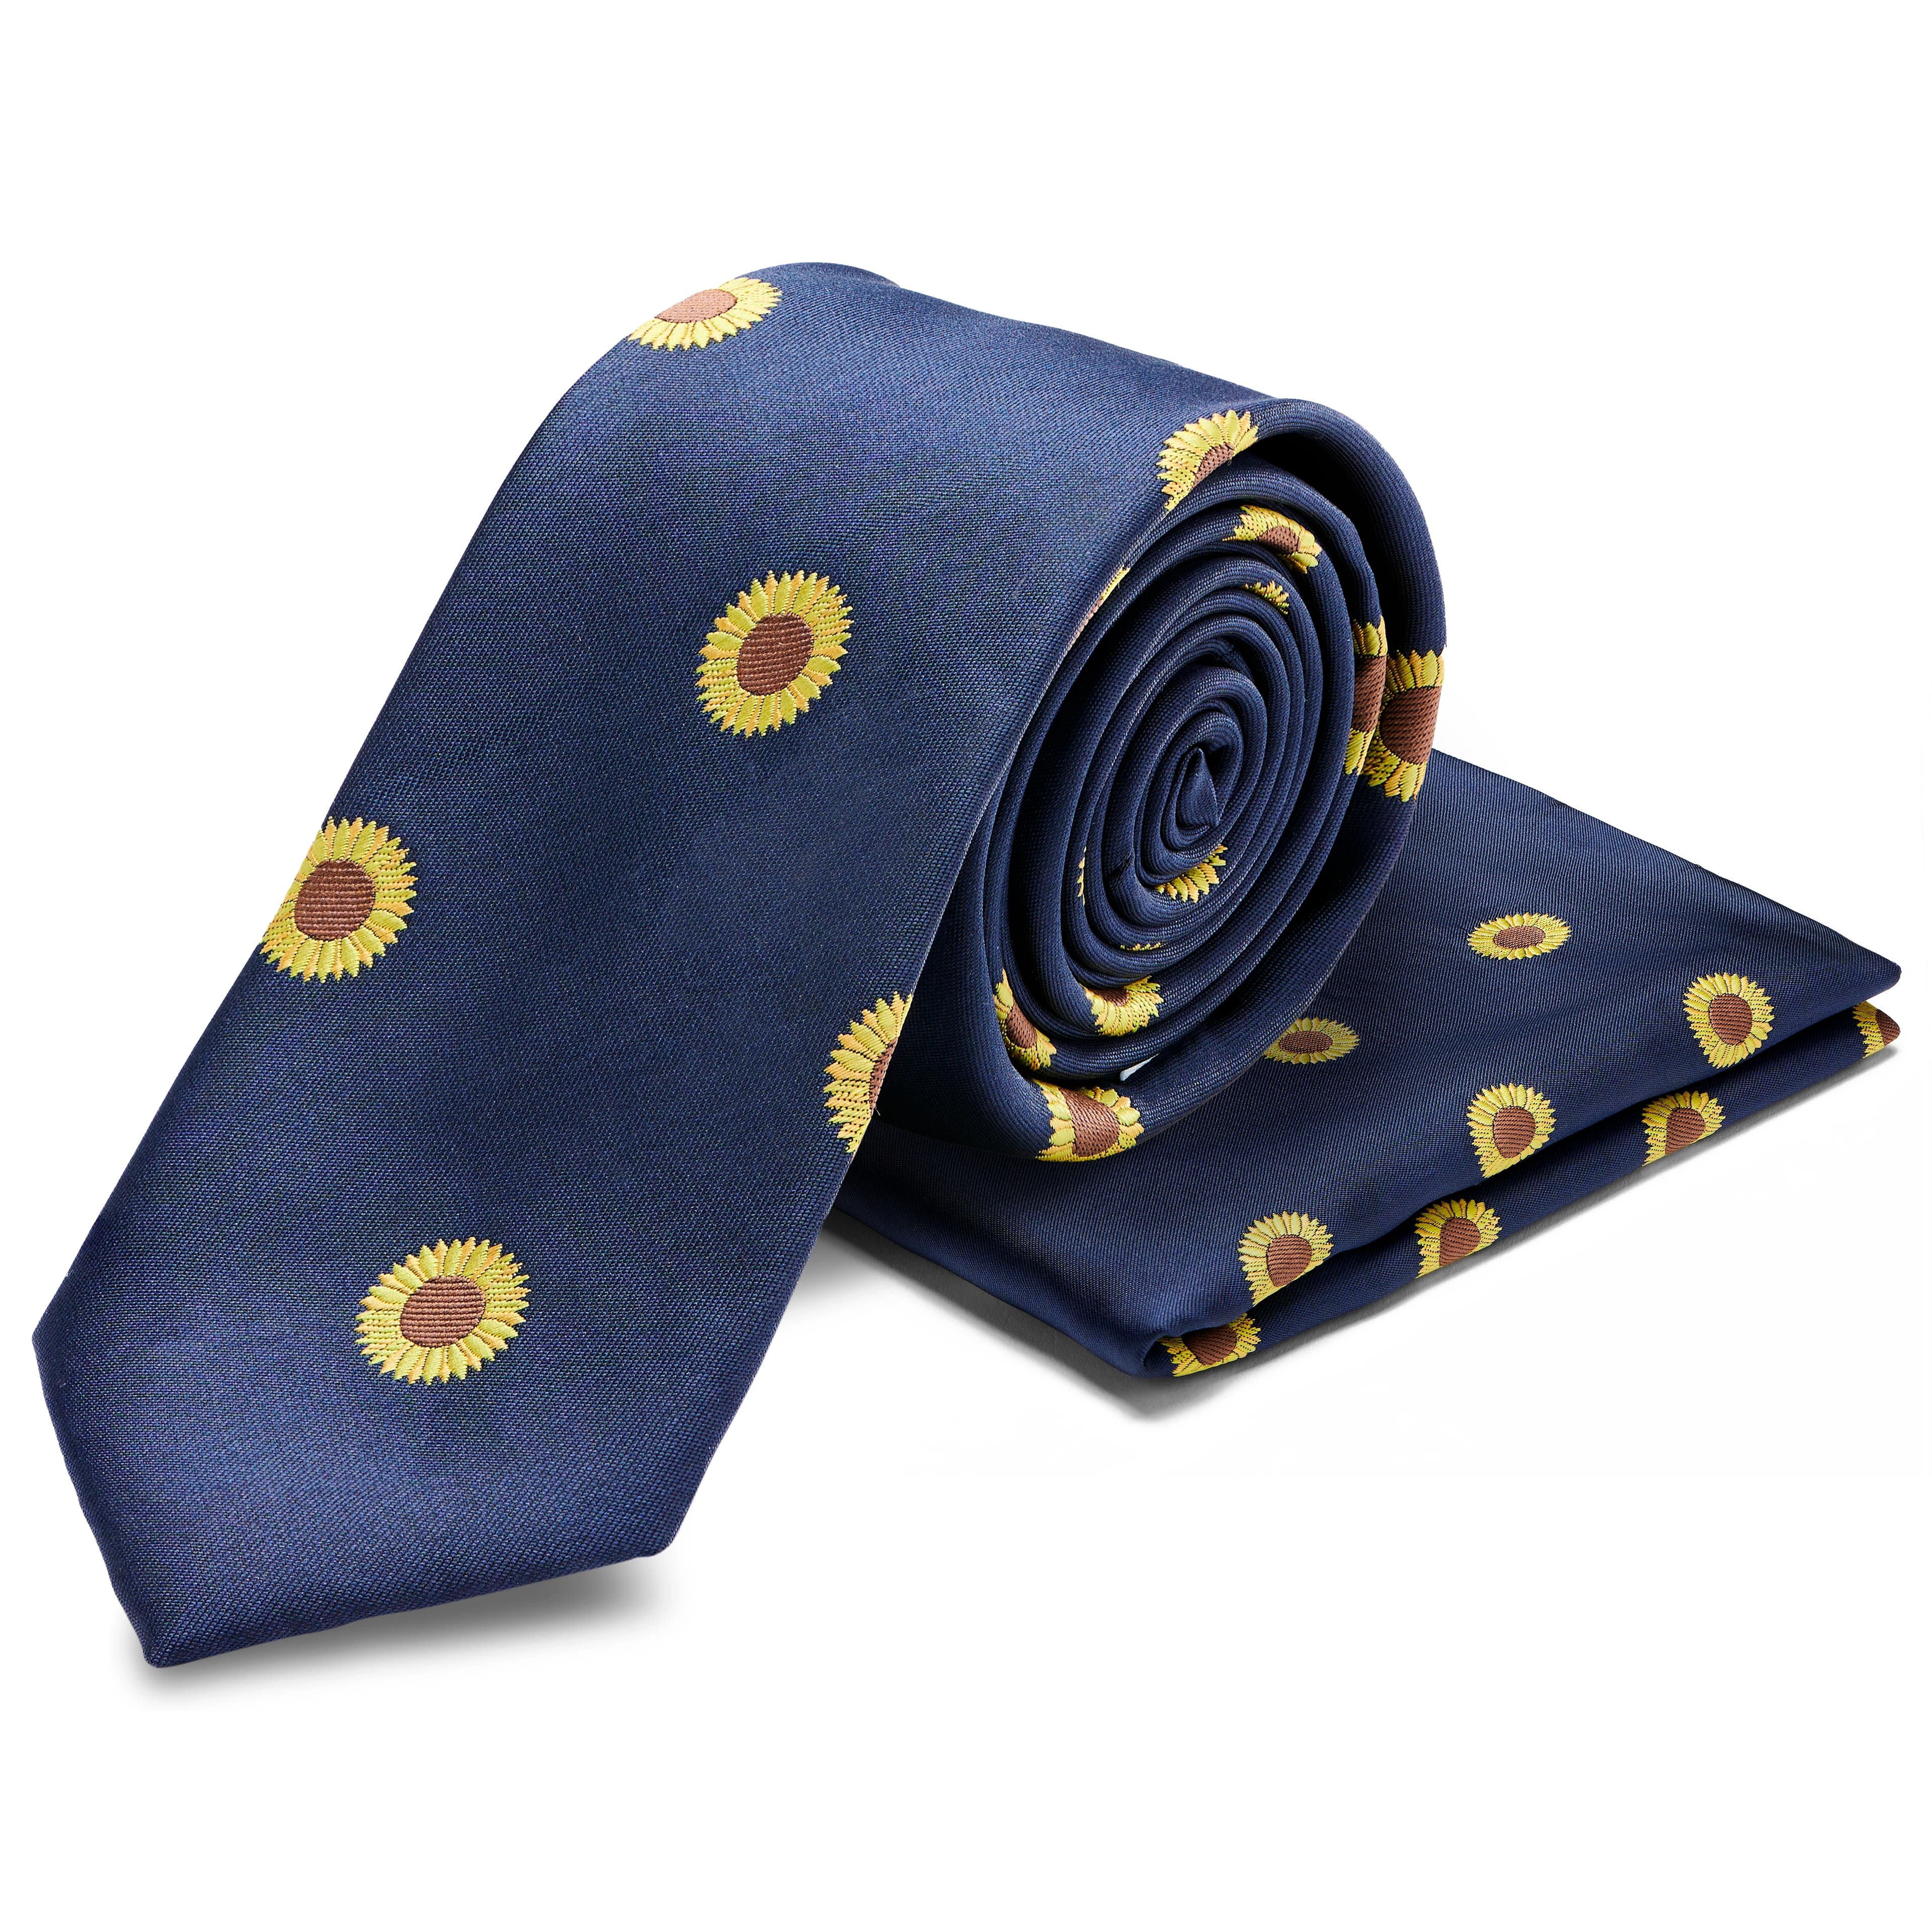 Double-Sided Pocket Square and Necktie Set With Sunflowers